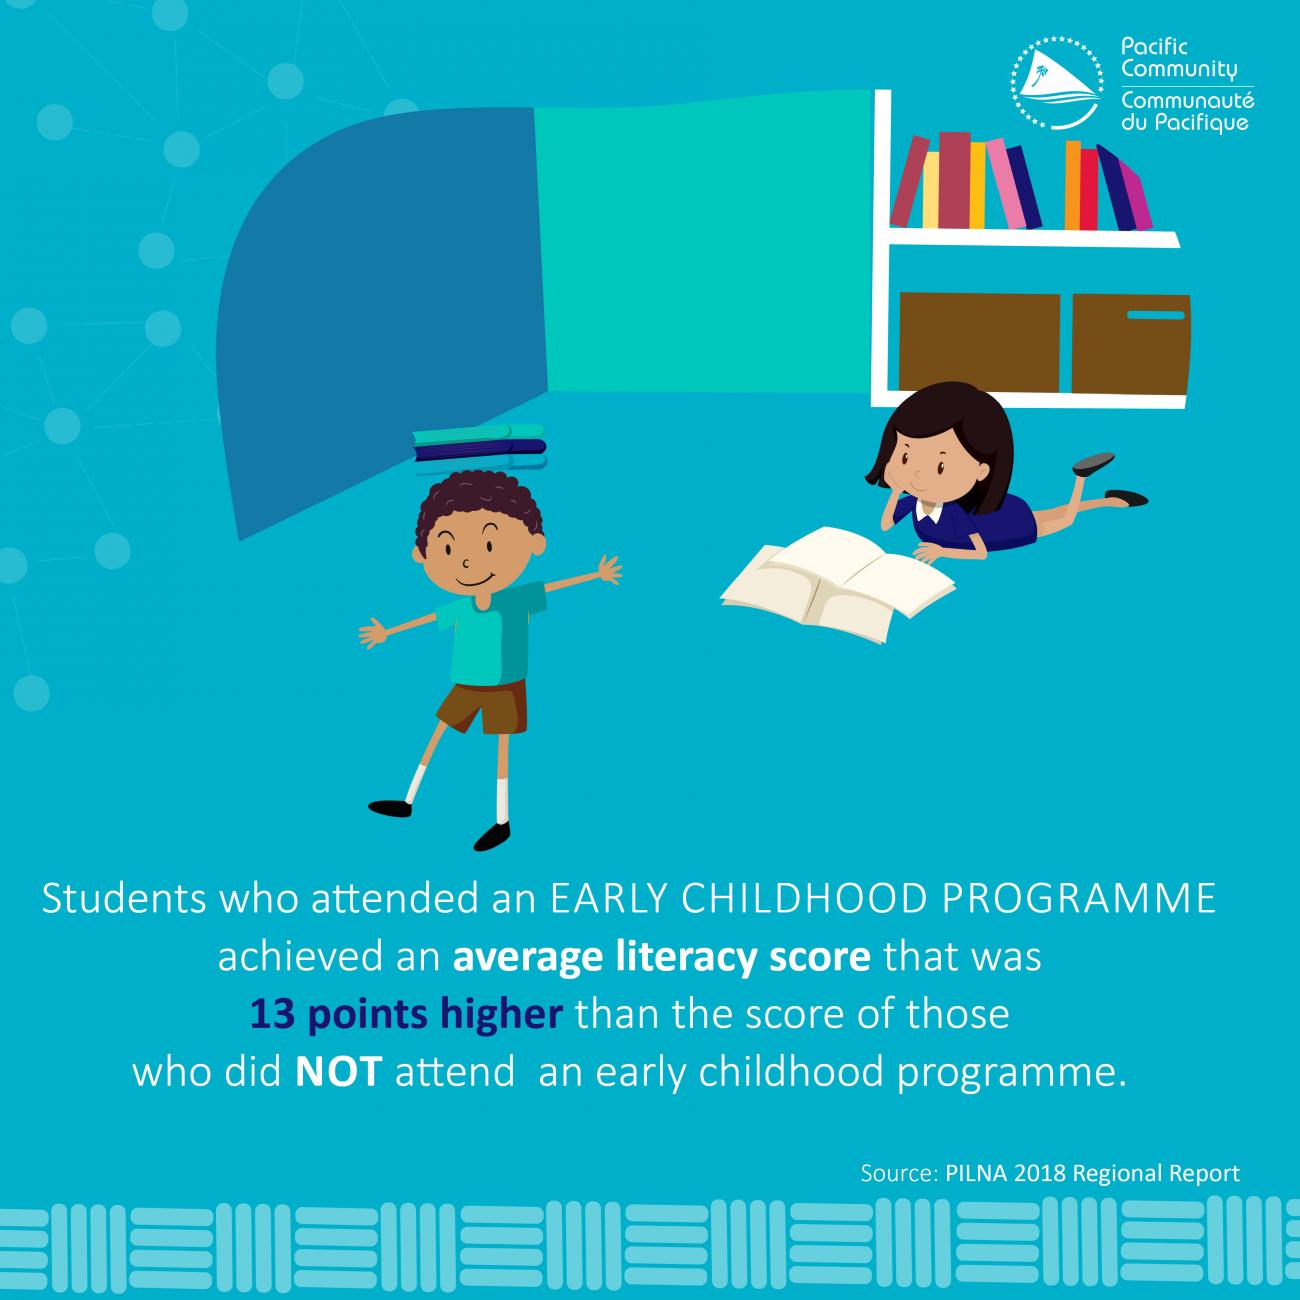 Students who attended an early childhood programme achieved an average literacy score that was 13 points higher than the score of those who did NOT attend an early childhood programme. 